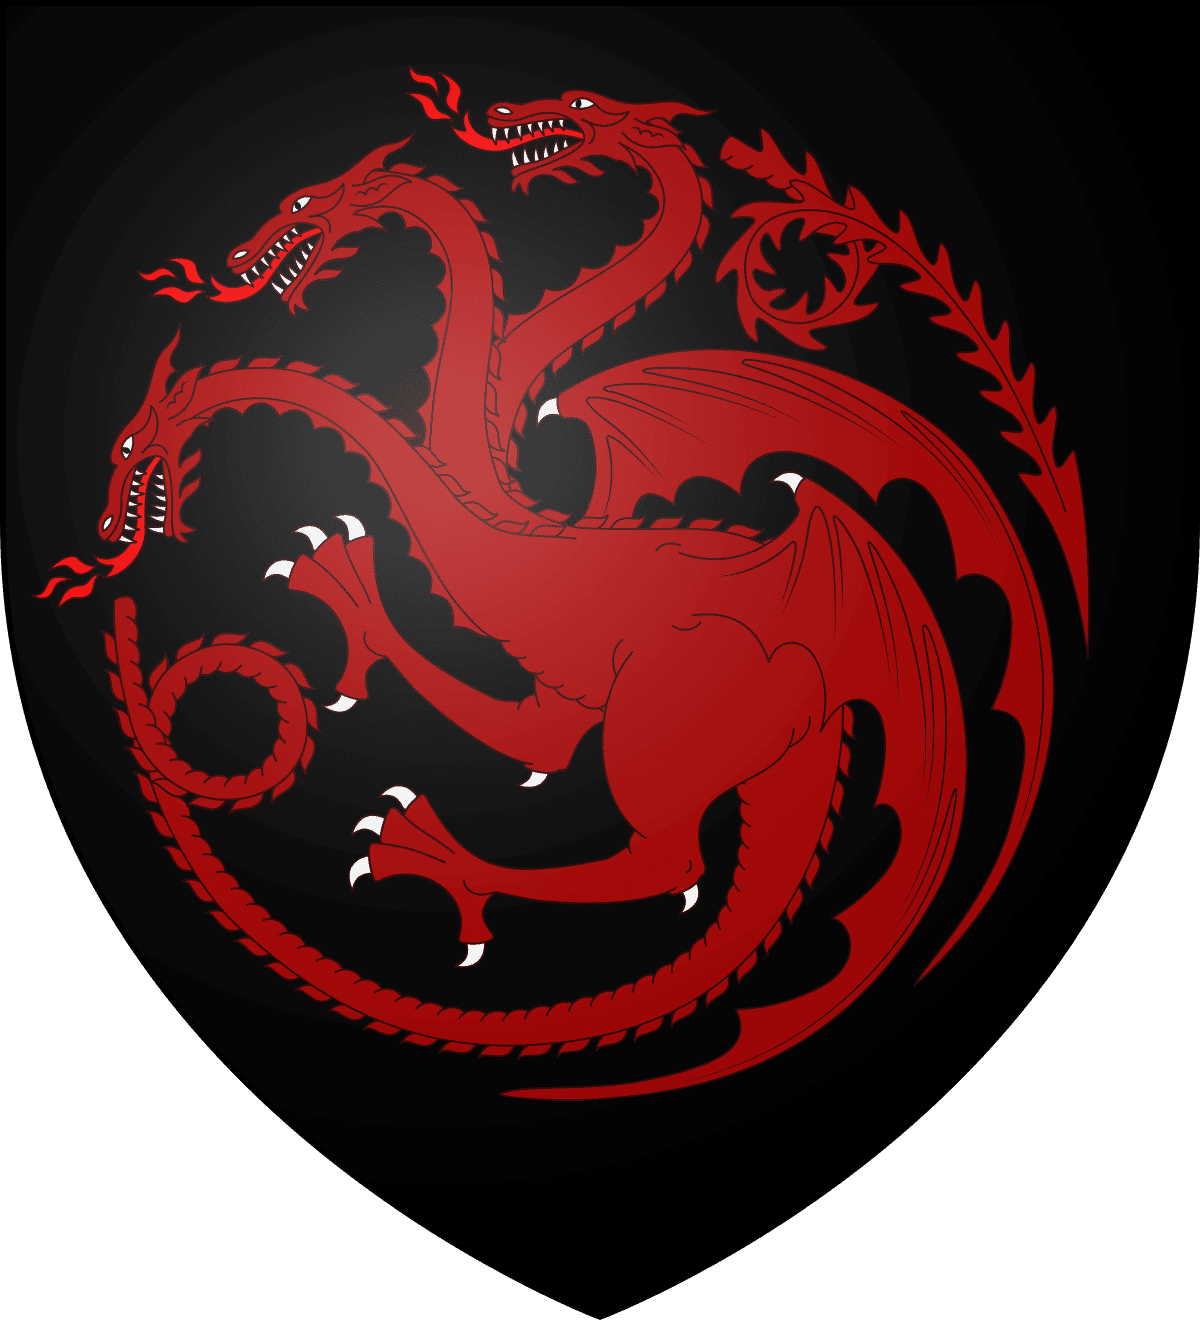 House Of The Dragon Renewed for Season 3 Before Second Season Airs